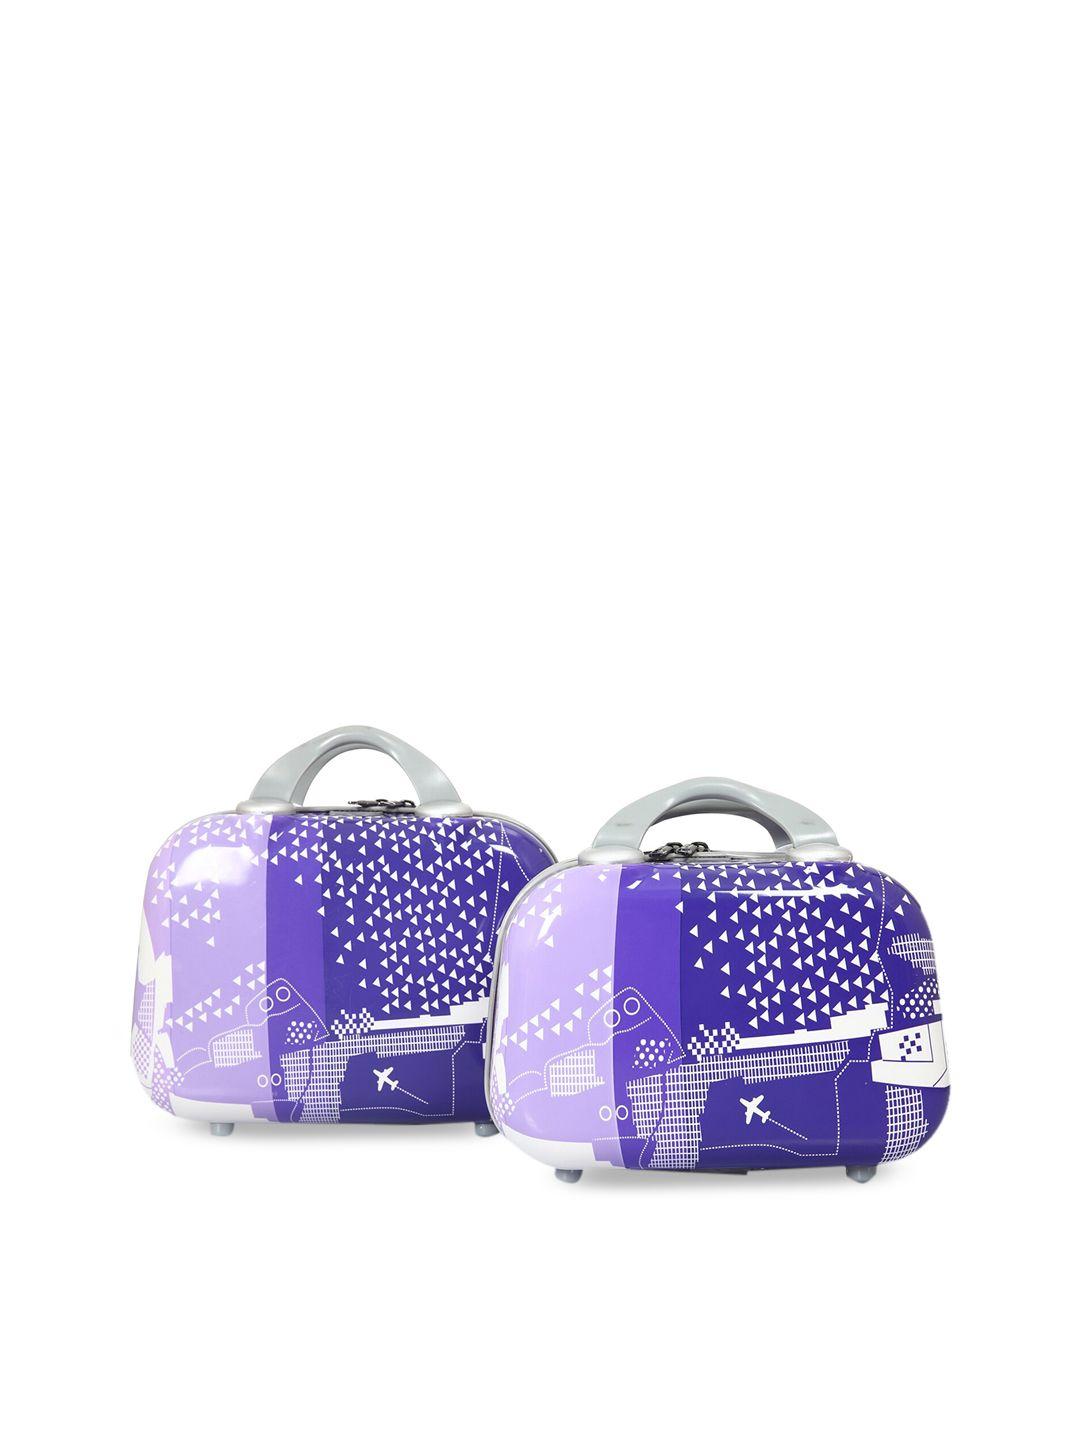 polo class set of 2 blue & purple printed hard-sided vanity bags